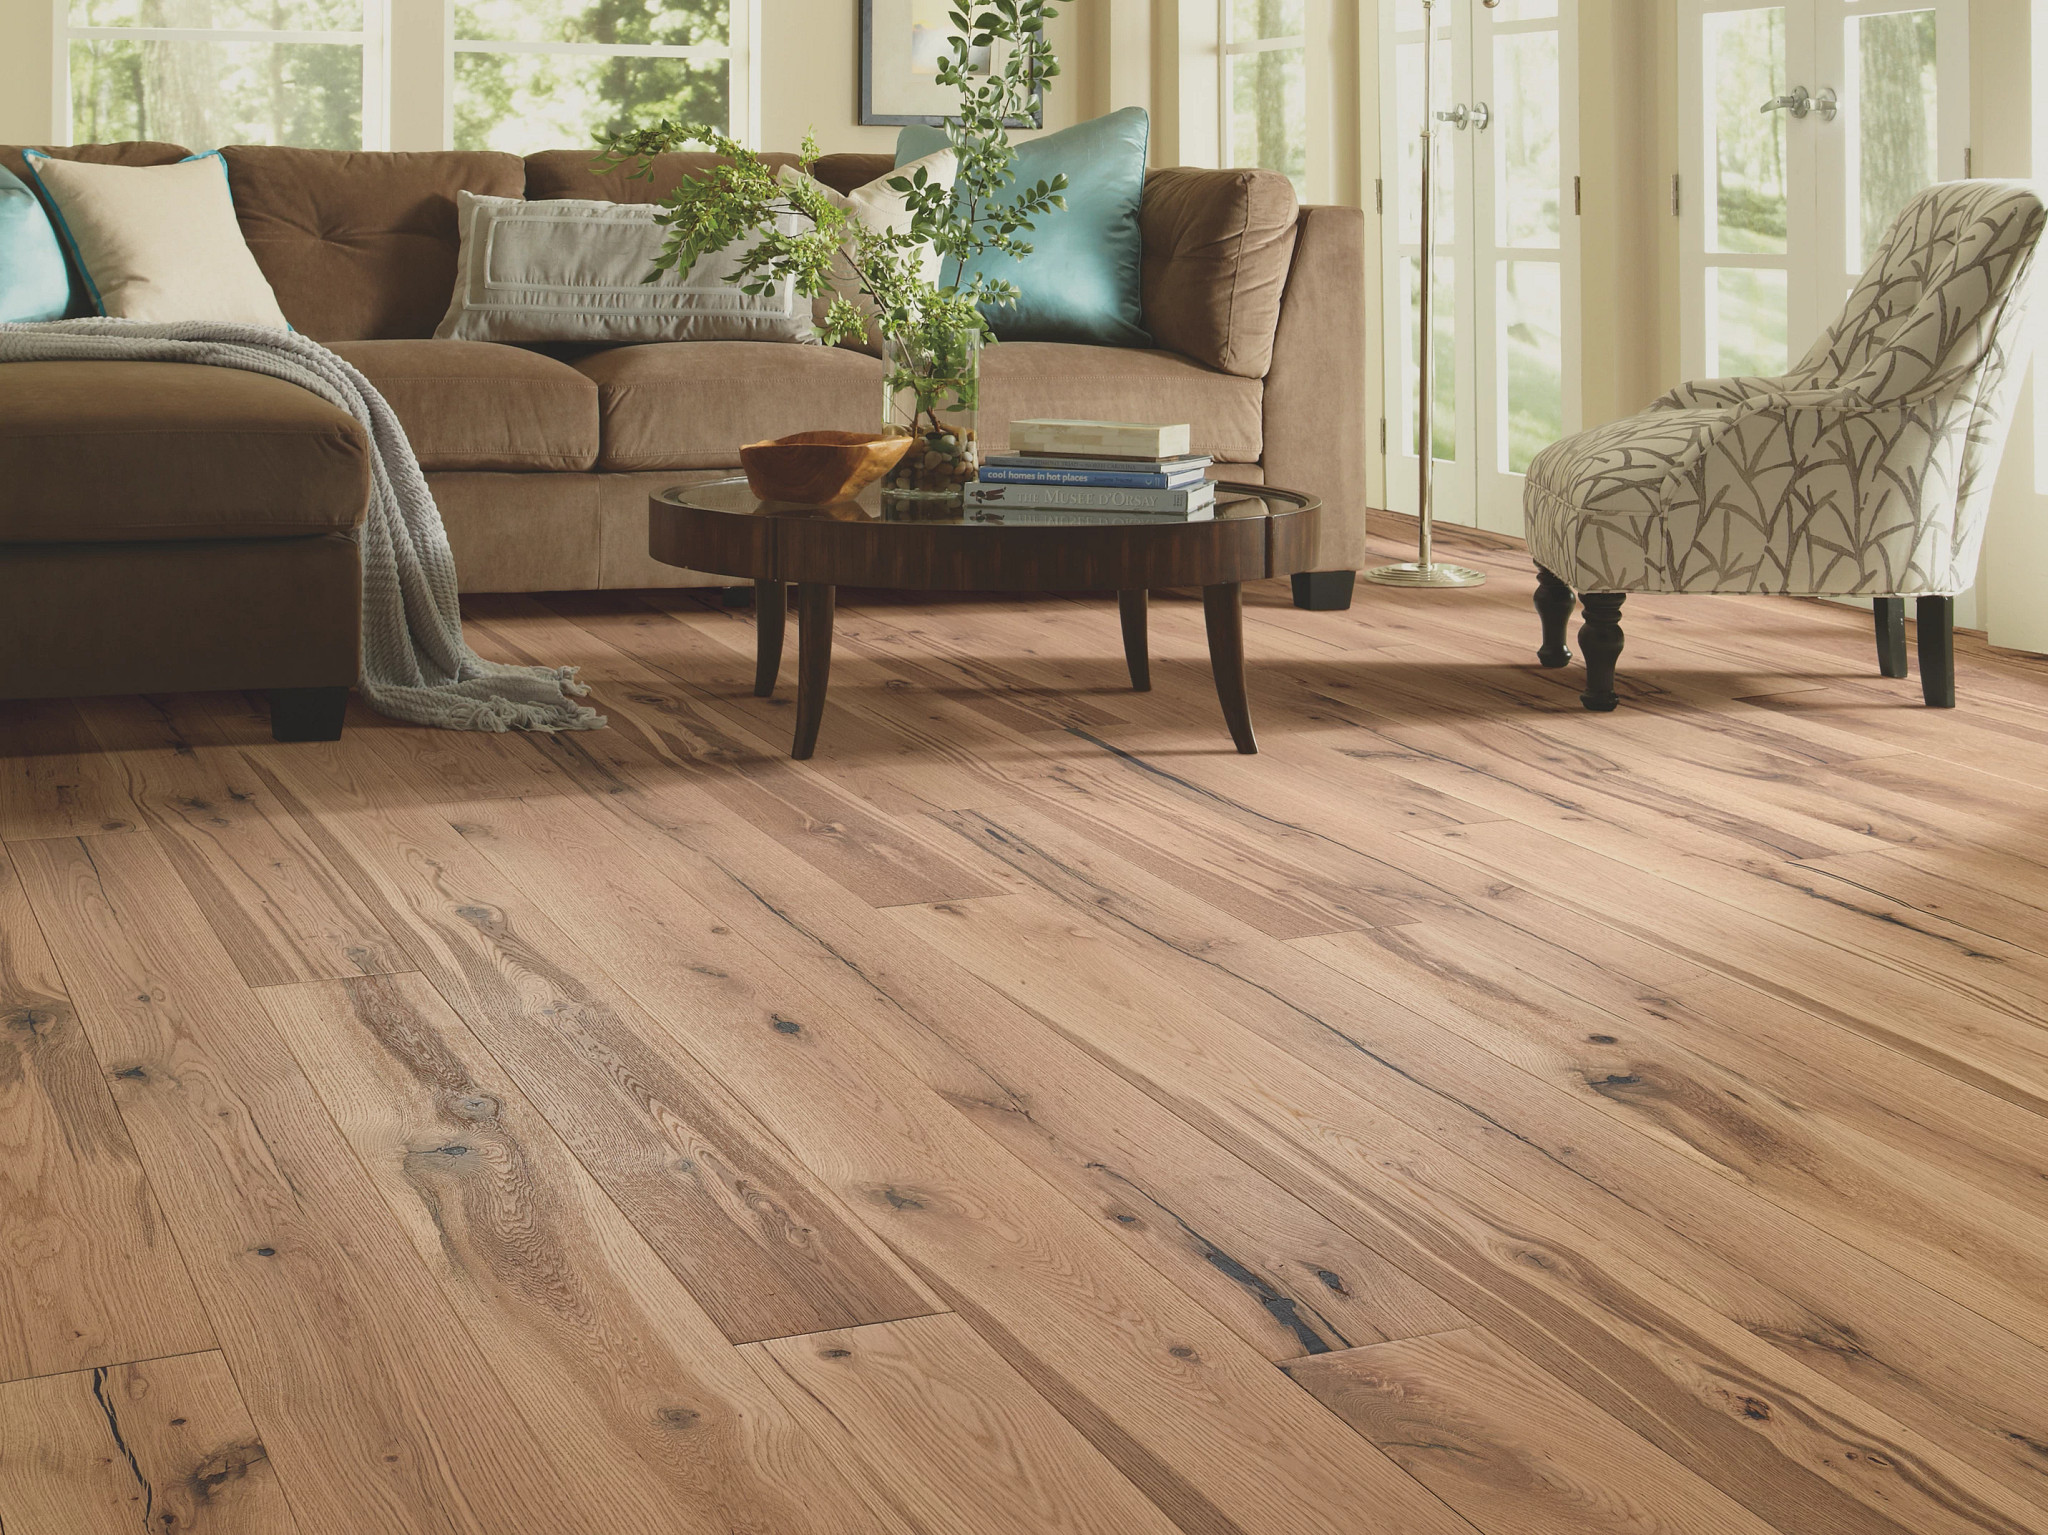 Complete Guide to Laminate Flooring in India With Cost and Benefits